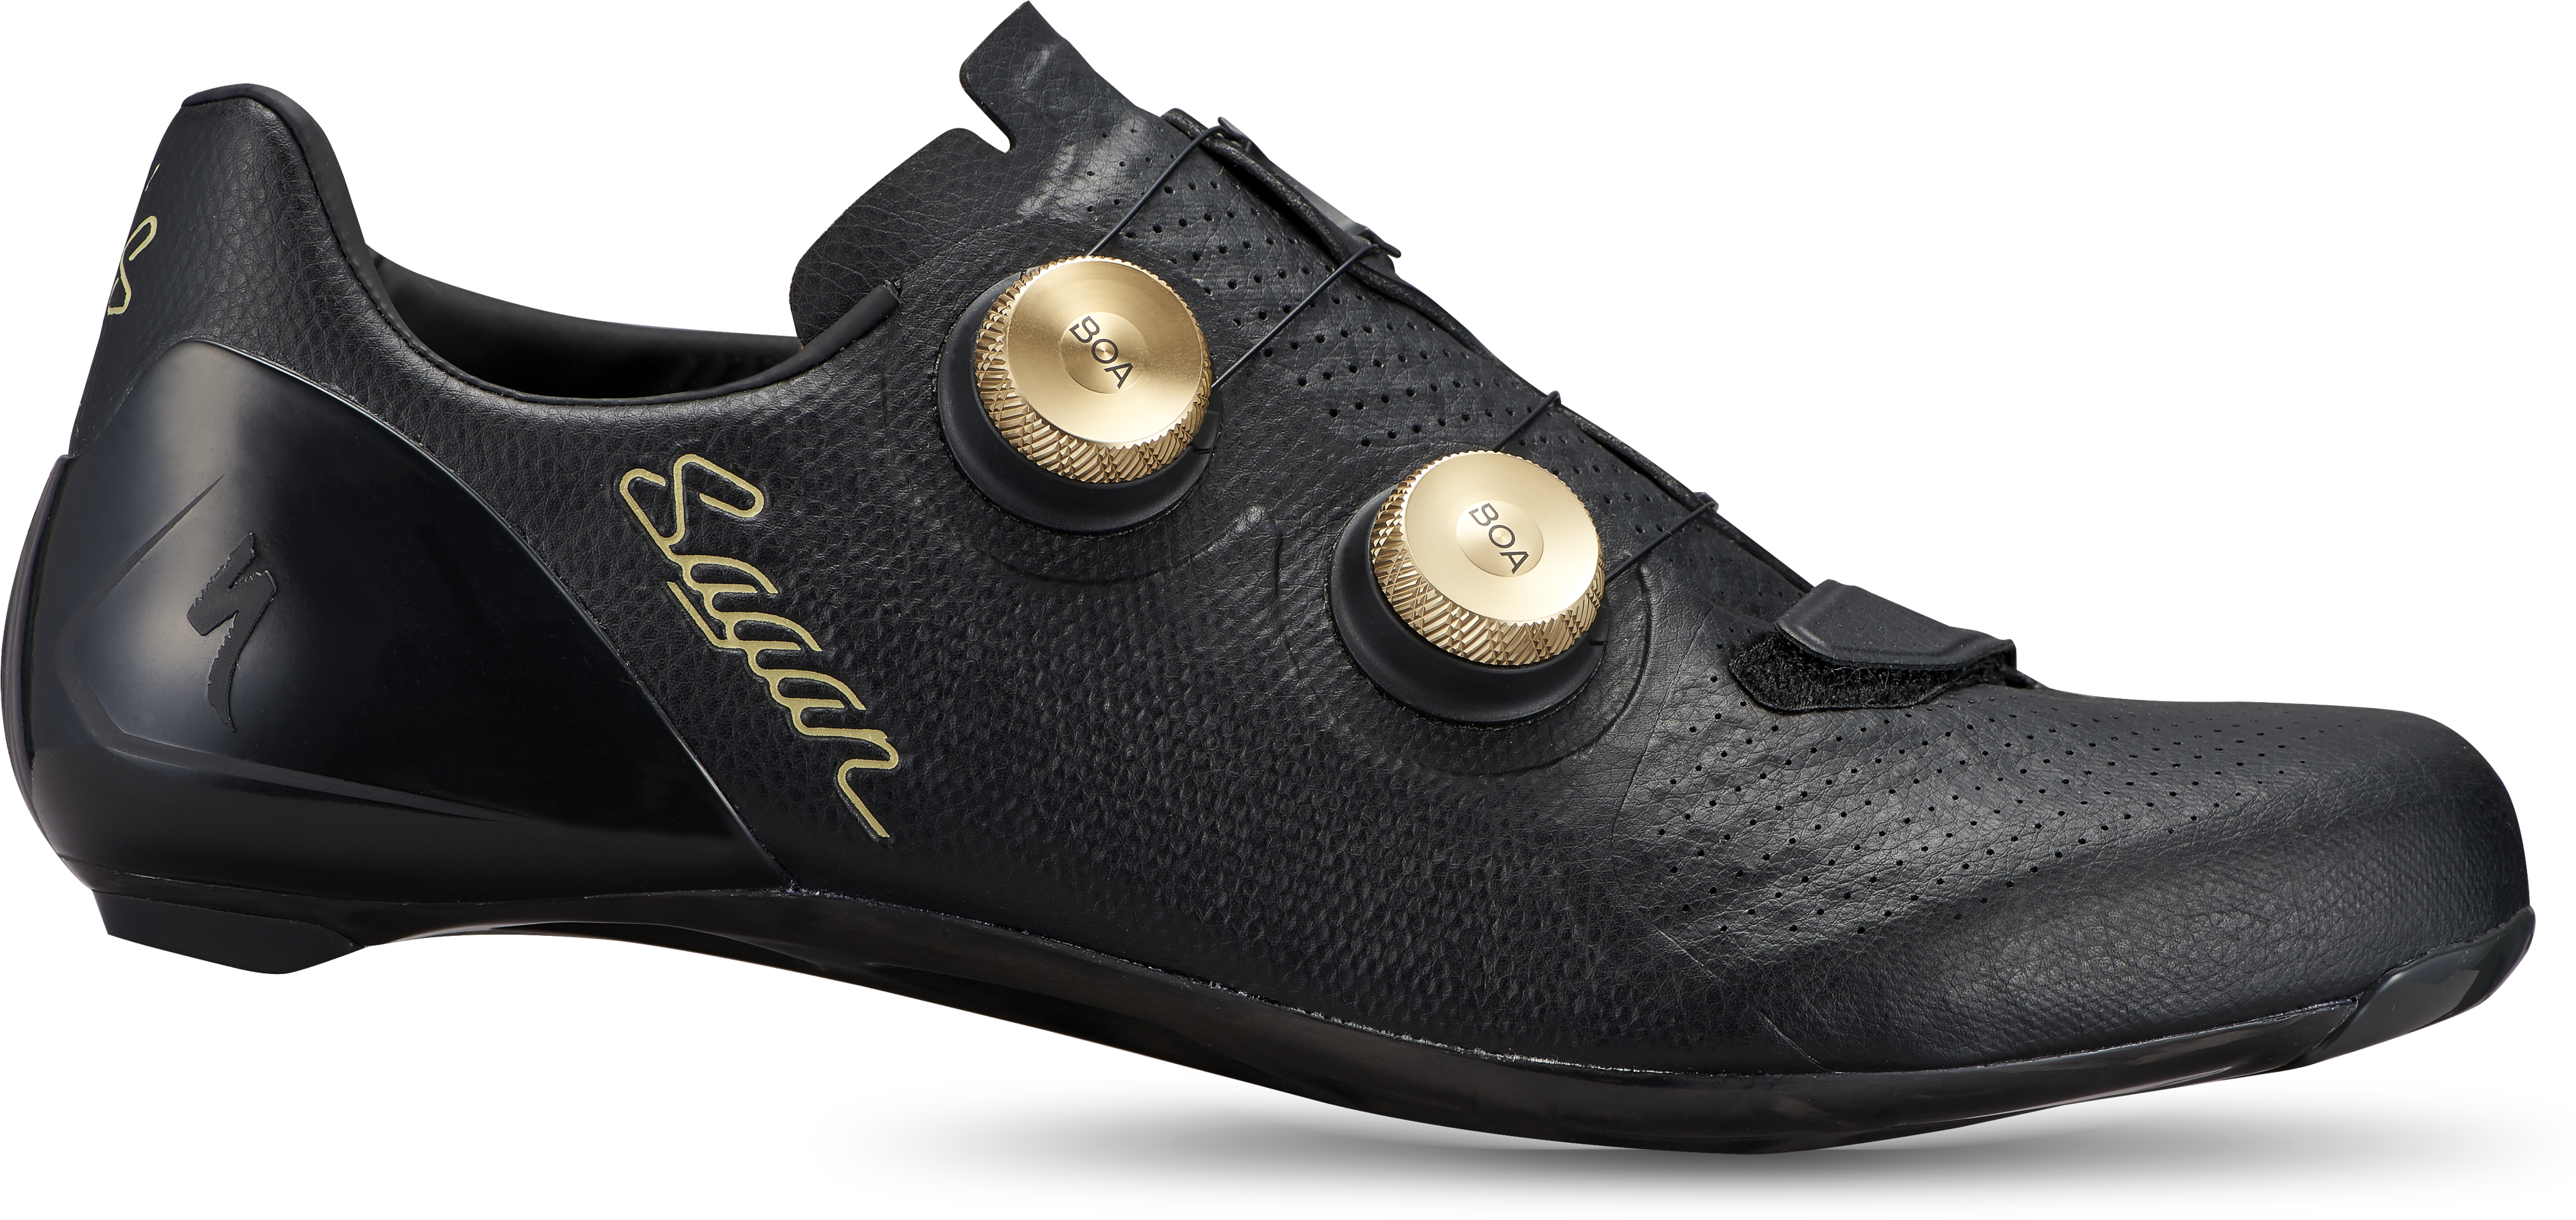 S-Works 7 Road Shoes - Sagan Collection: Disruption